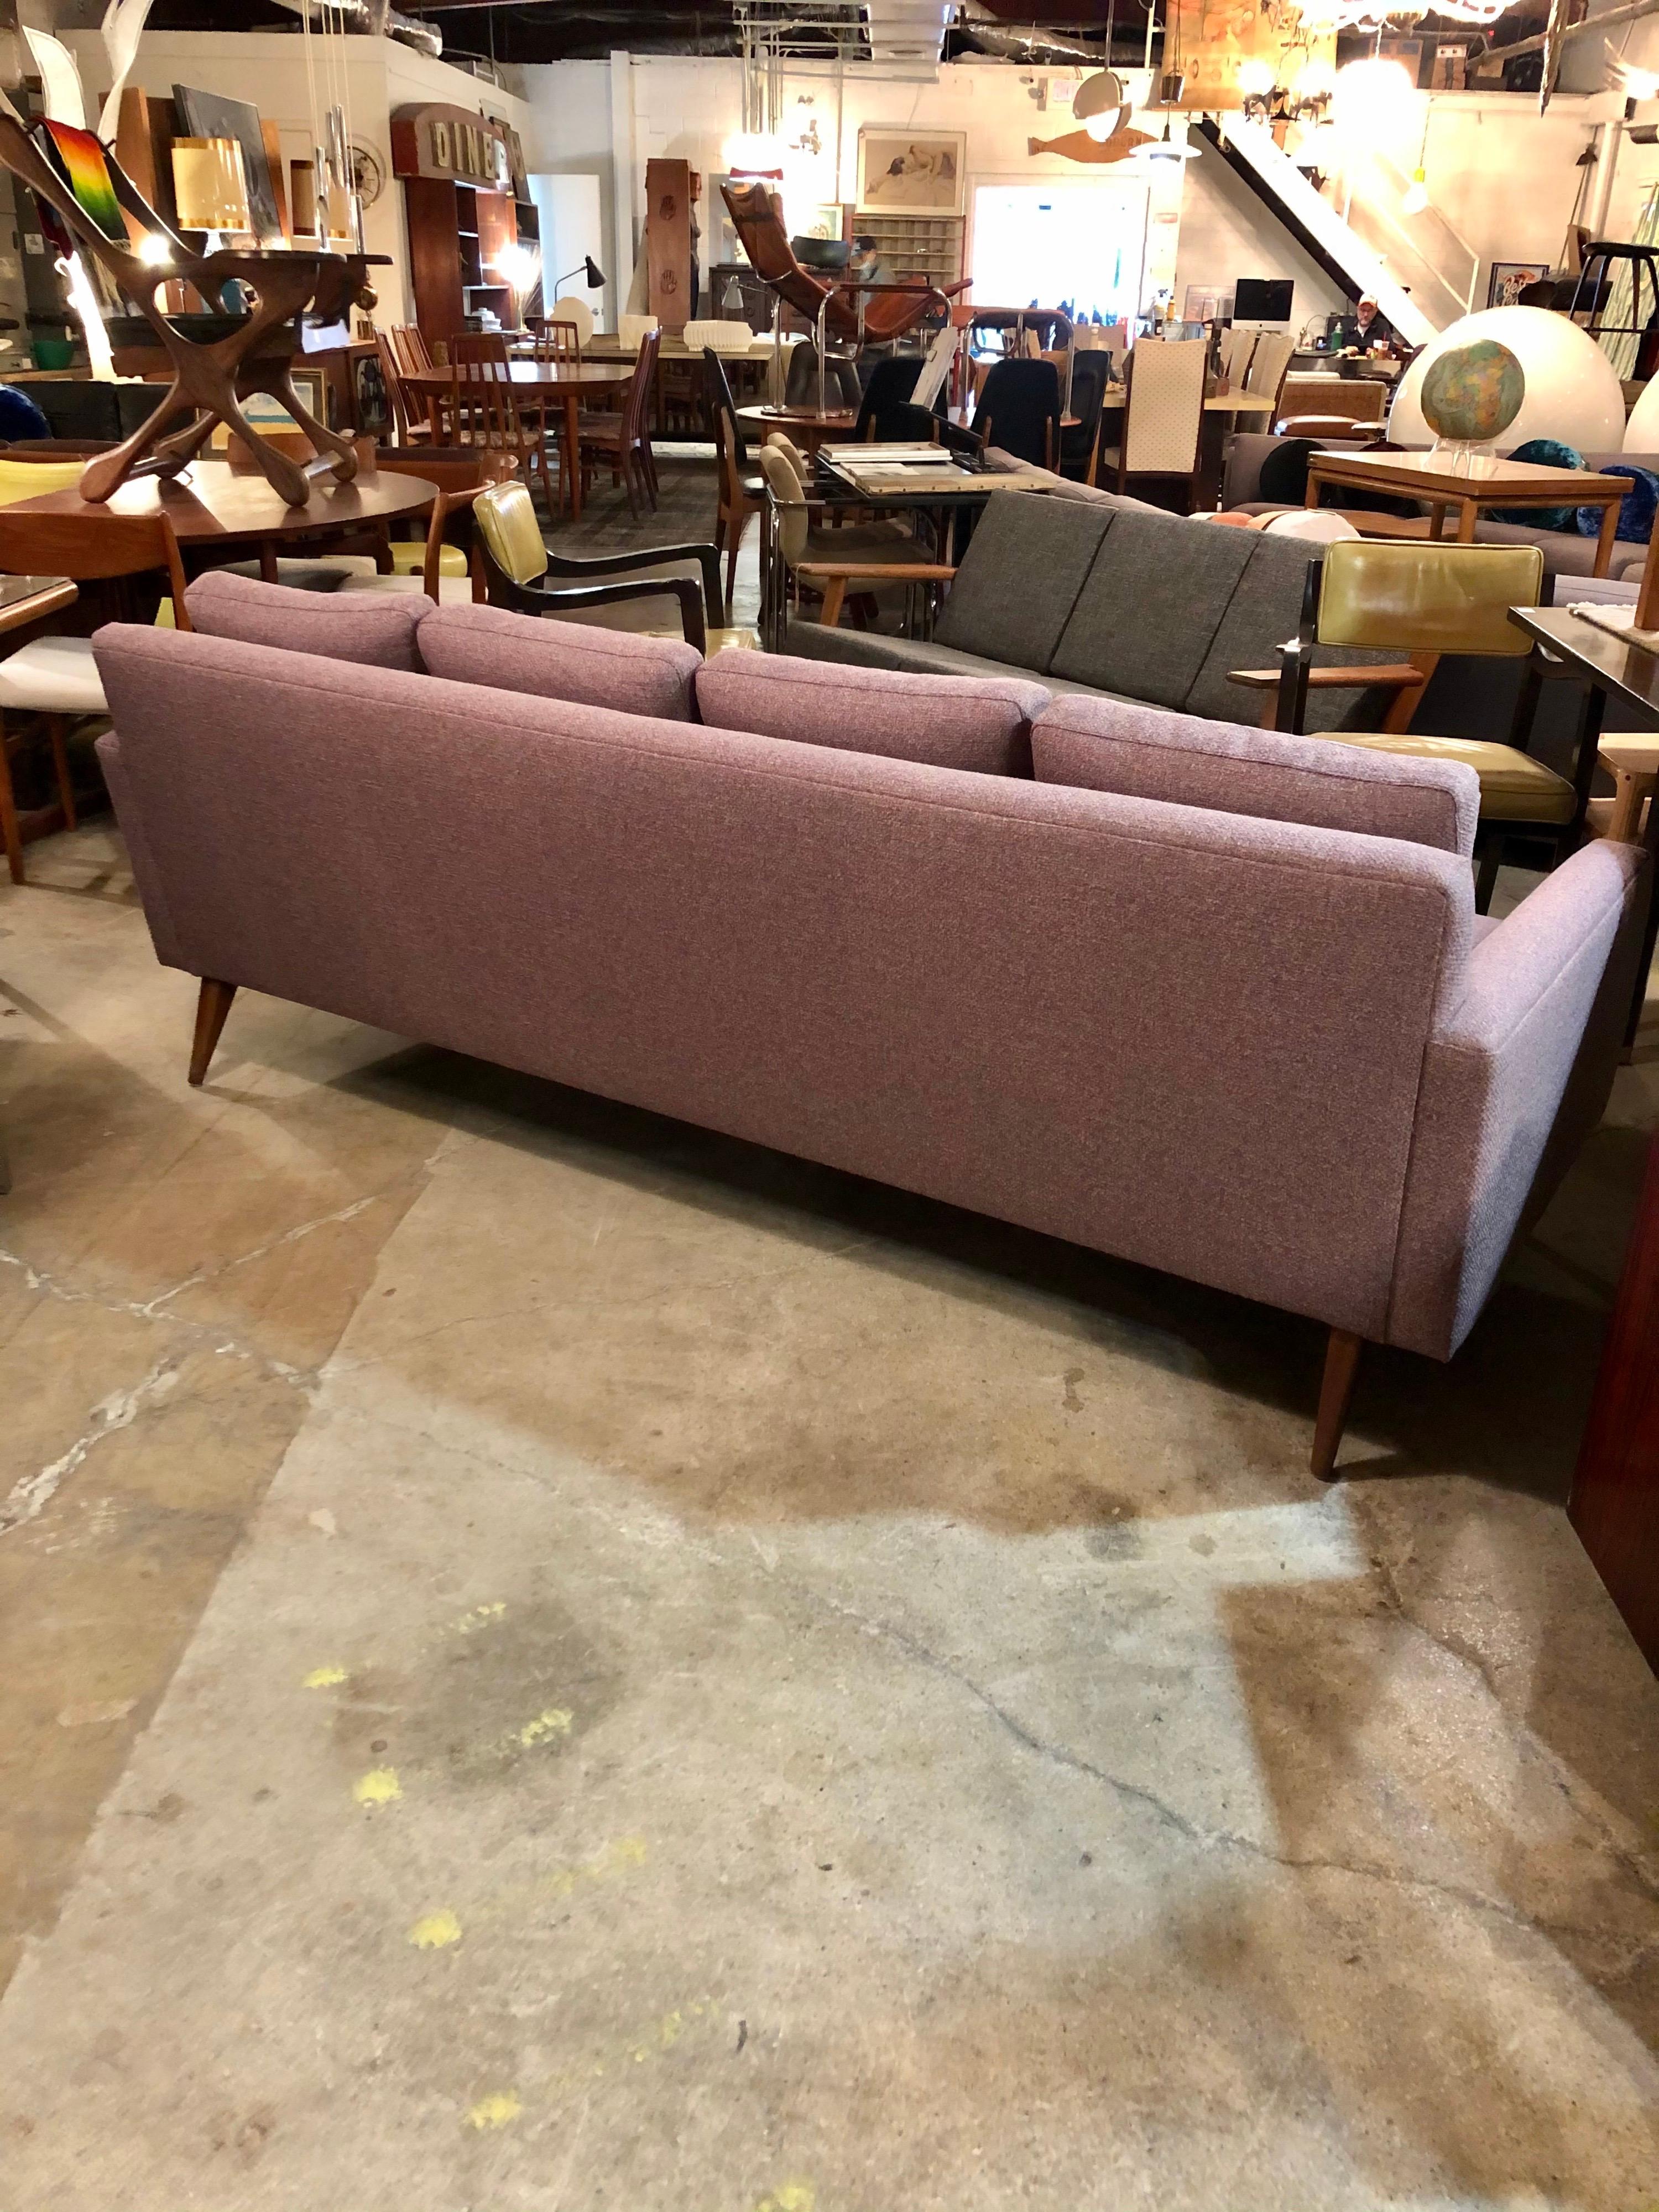 Upholstery Vintage 1960s Lavender 4-Seat Sofa by Paul McCobb for Directional